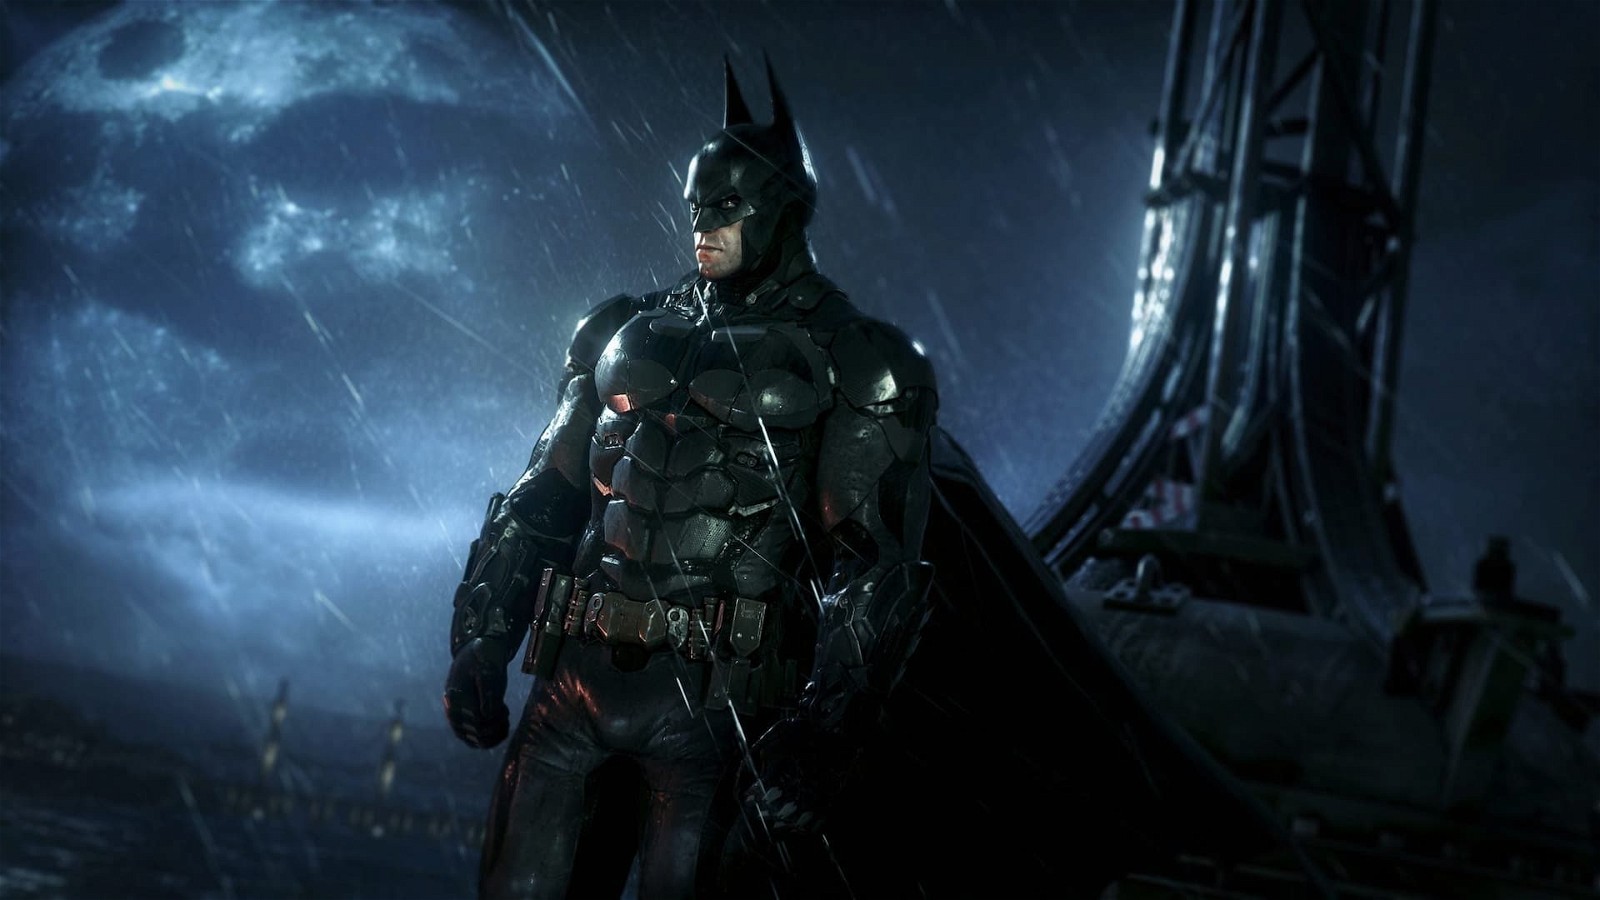 Batman as he appears in the Arkham series, voiced by Kevin Conroy